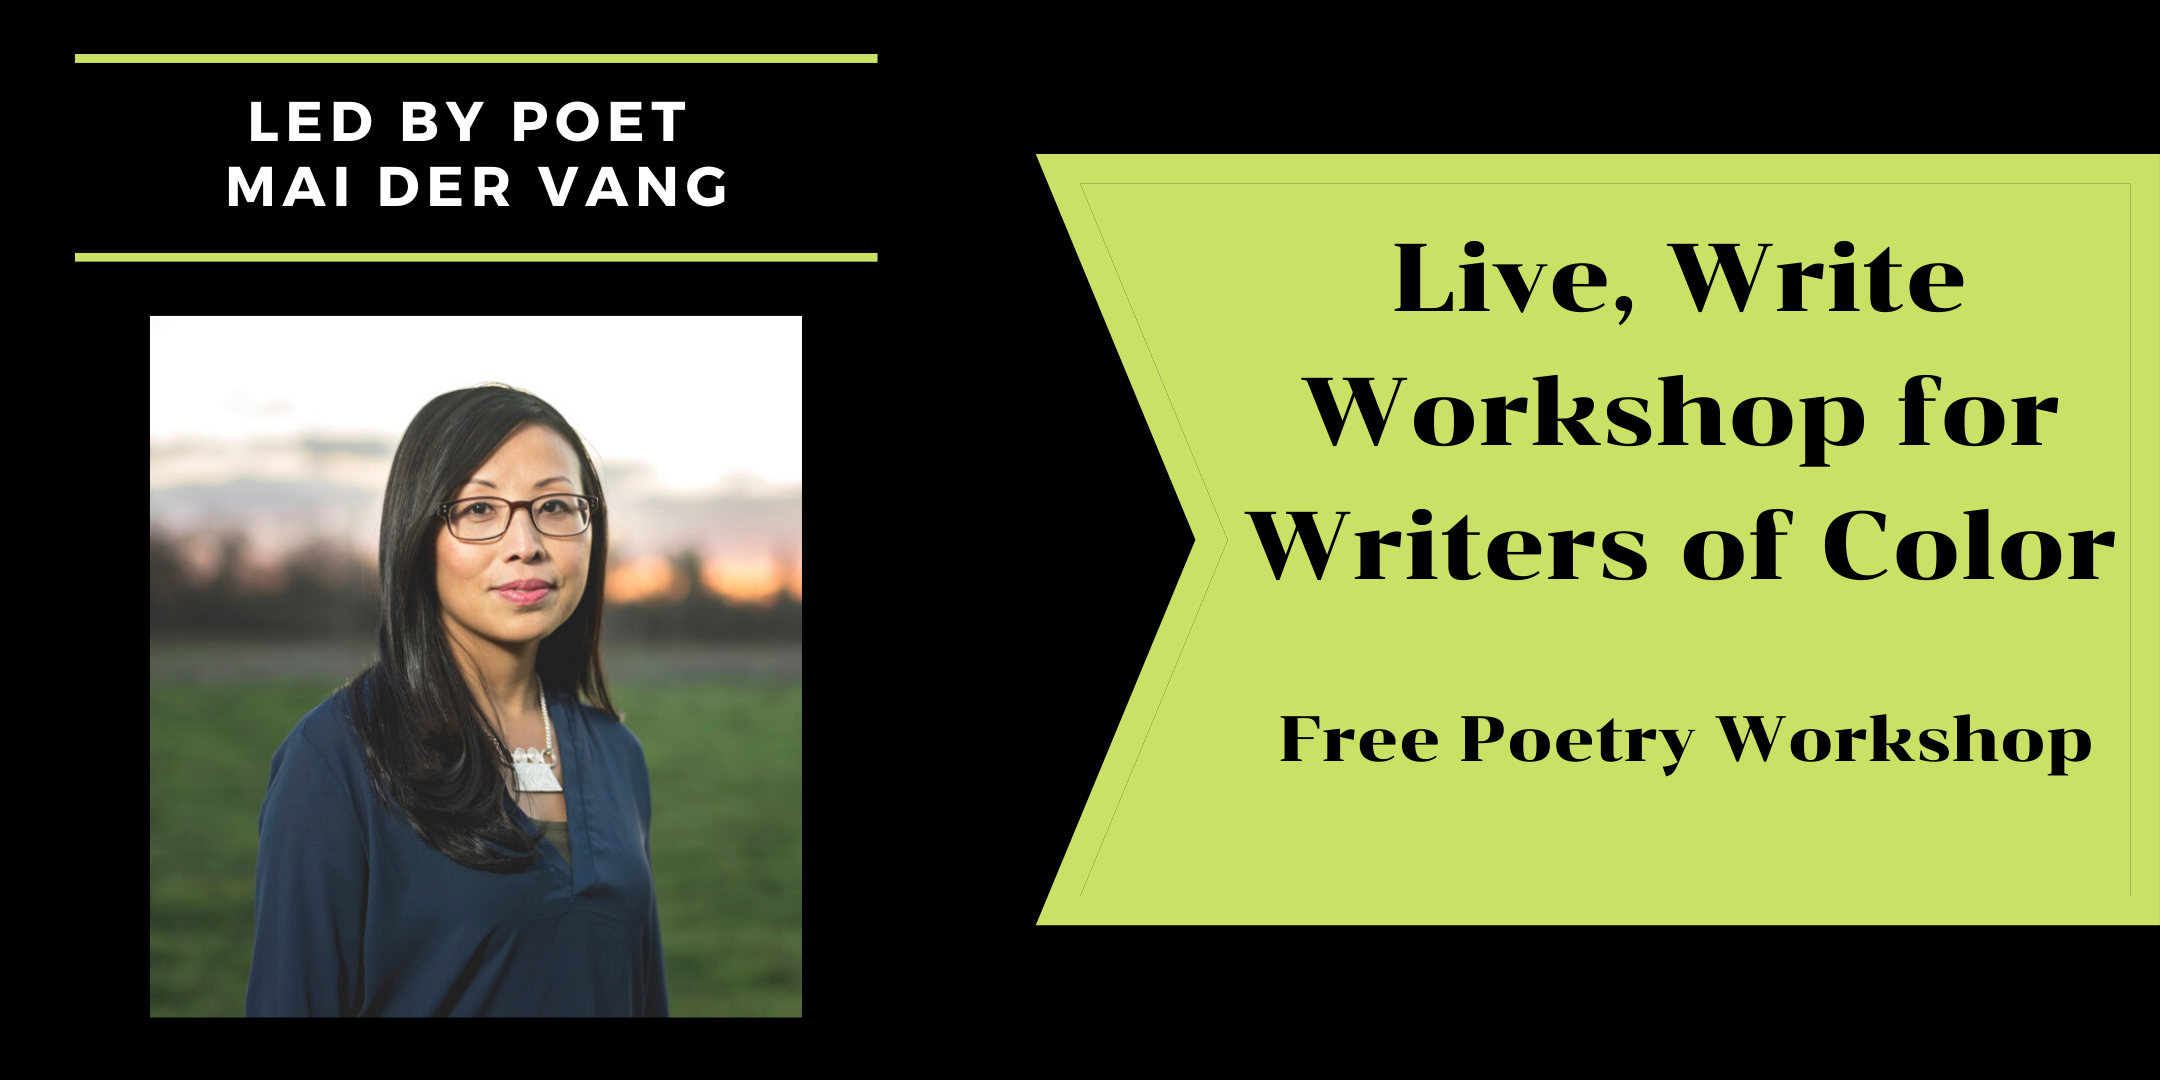 Live, Write Workshop for Writers of Color with Mai Der Vang